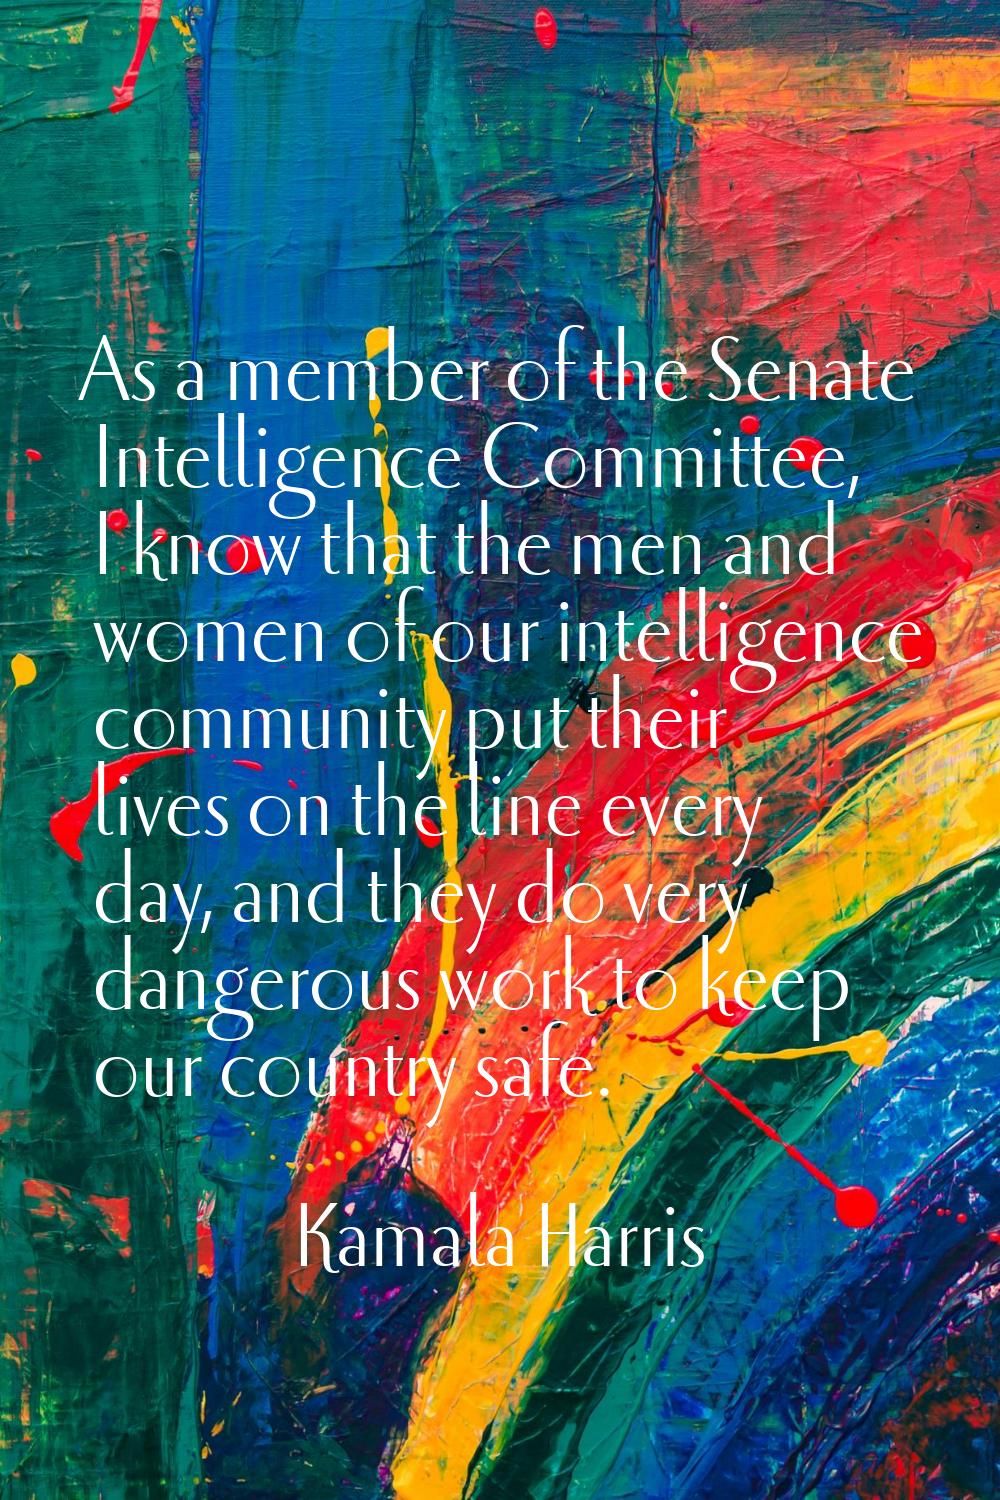 As a member of the Senate Intelligence Committee, I know that the men and women of our intelligence